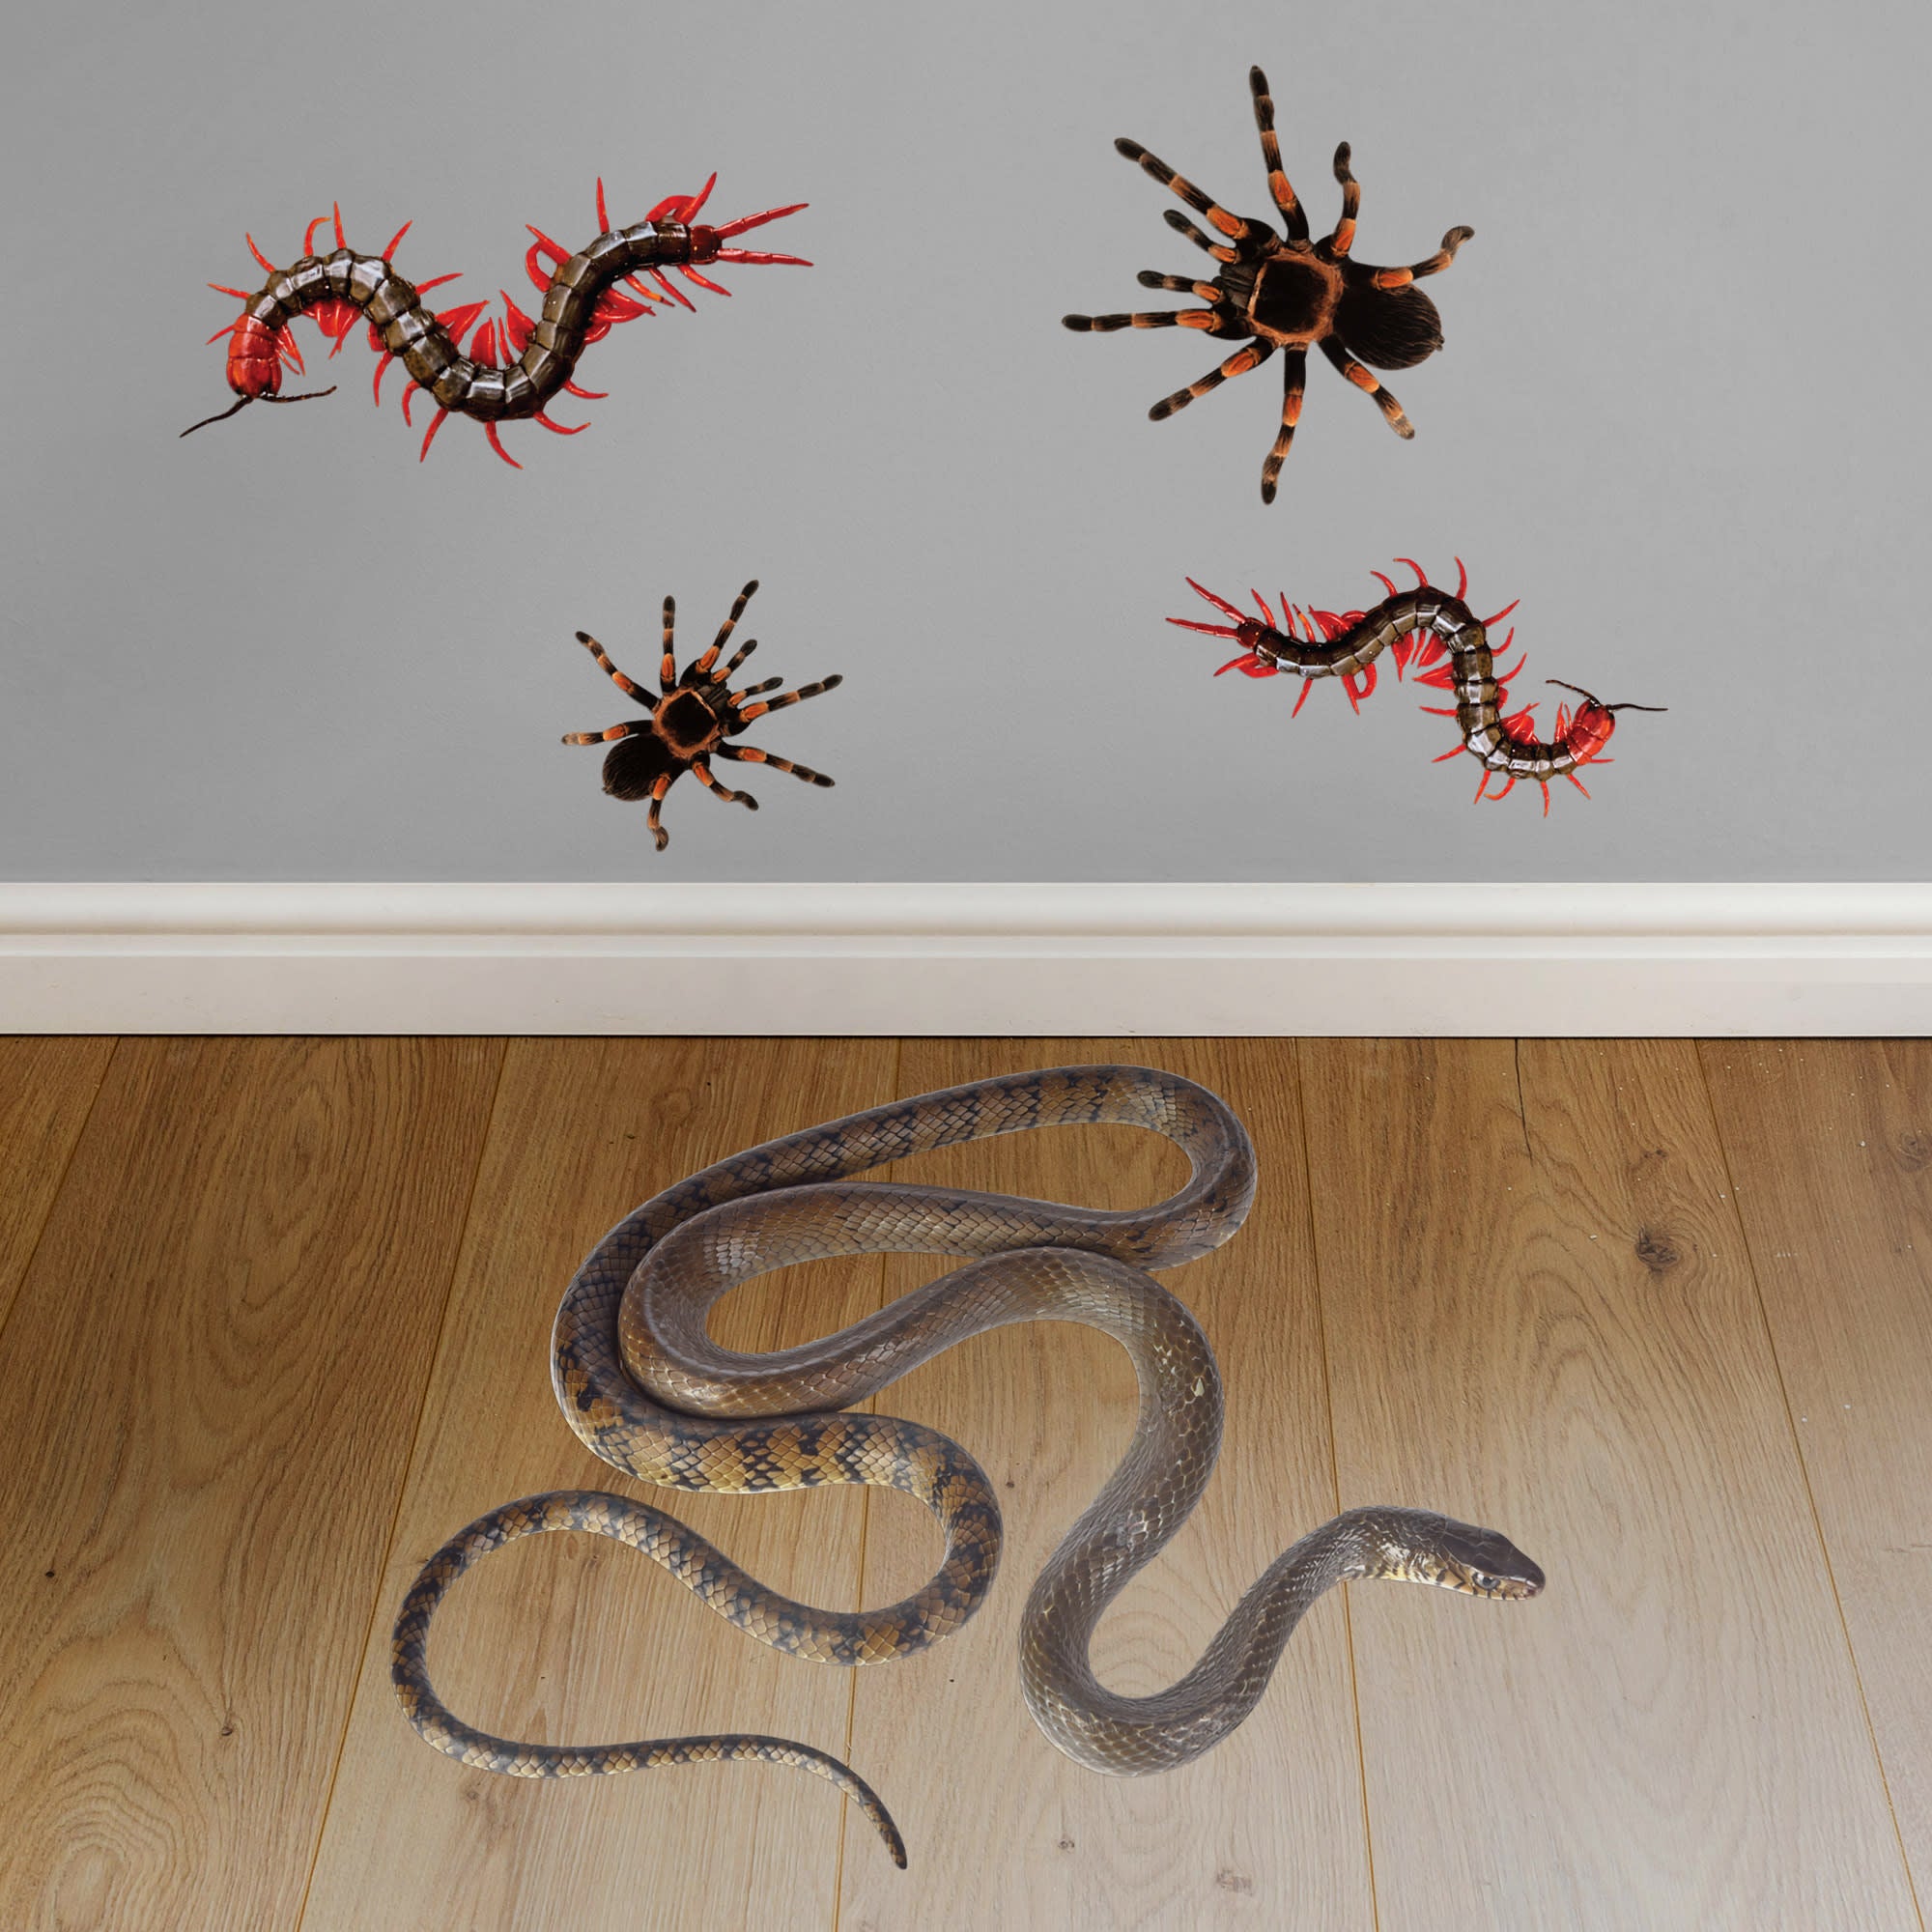 Creepy Crawlers Collection - Removable Vinyl Decal 12.0"W x 17.0"H by Fathead